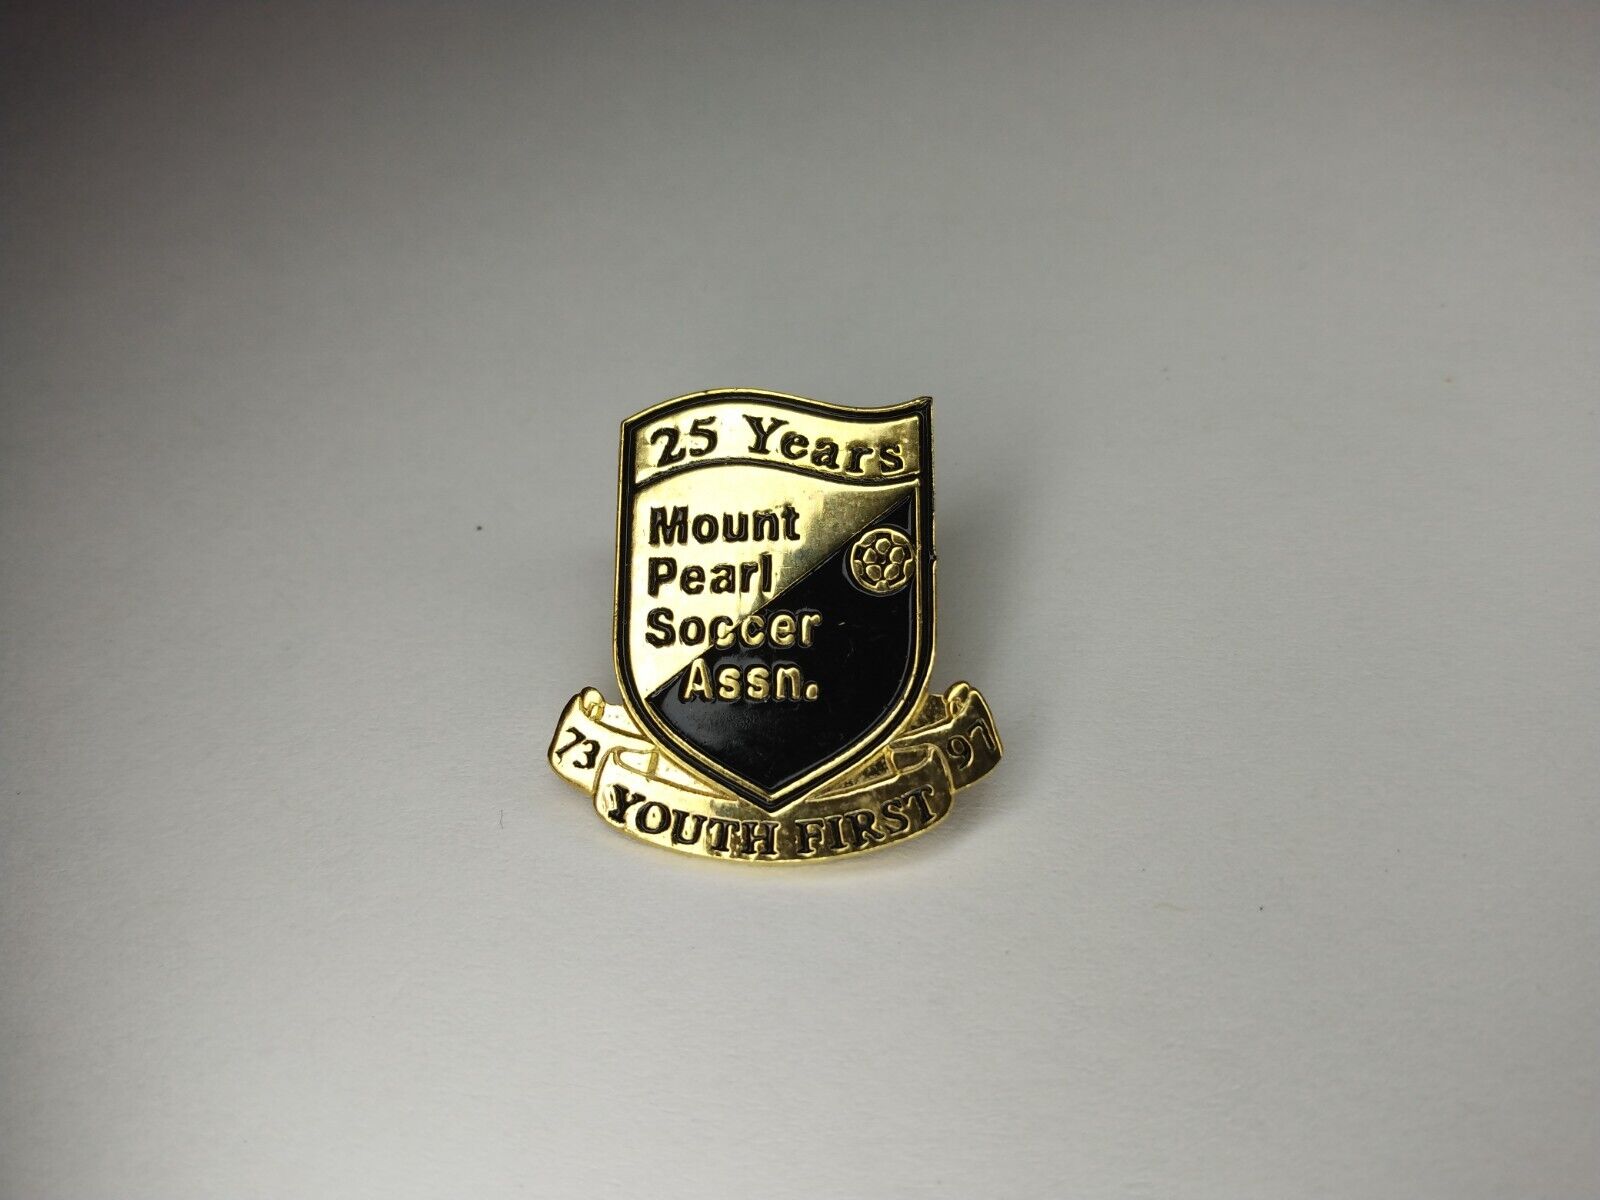 Mount Pearl Soccer Association 25 Years Pin - Mt. Assn. Newfoundland NFLD Canada